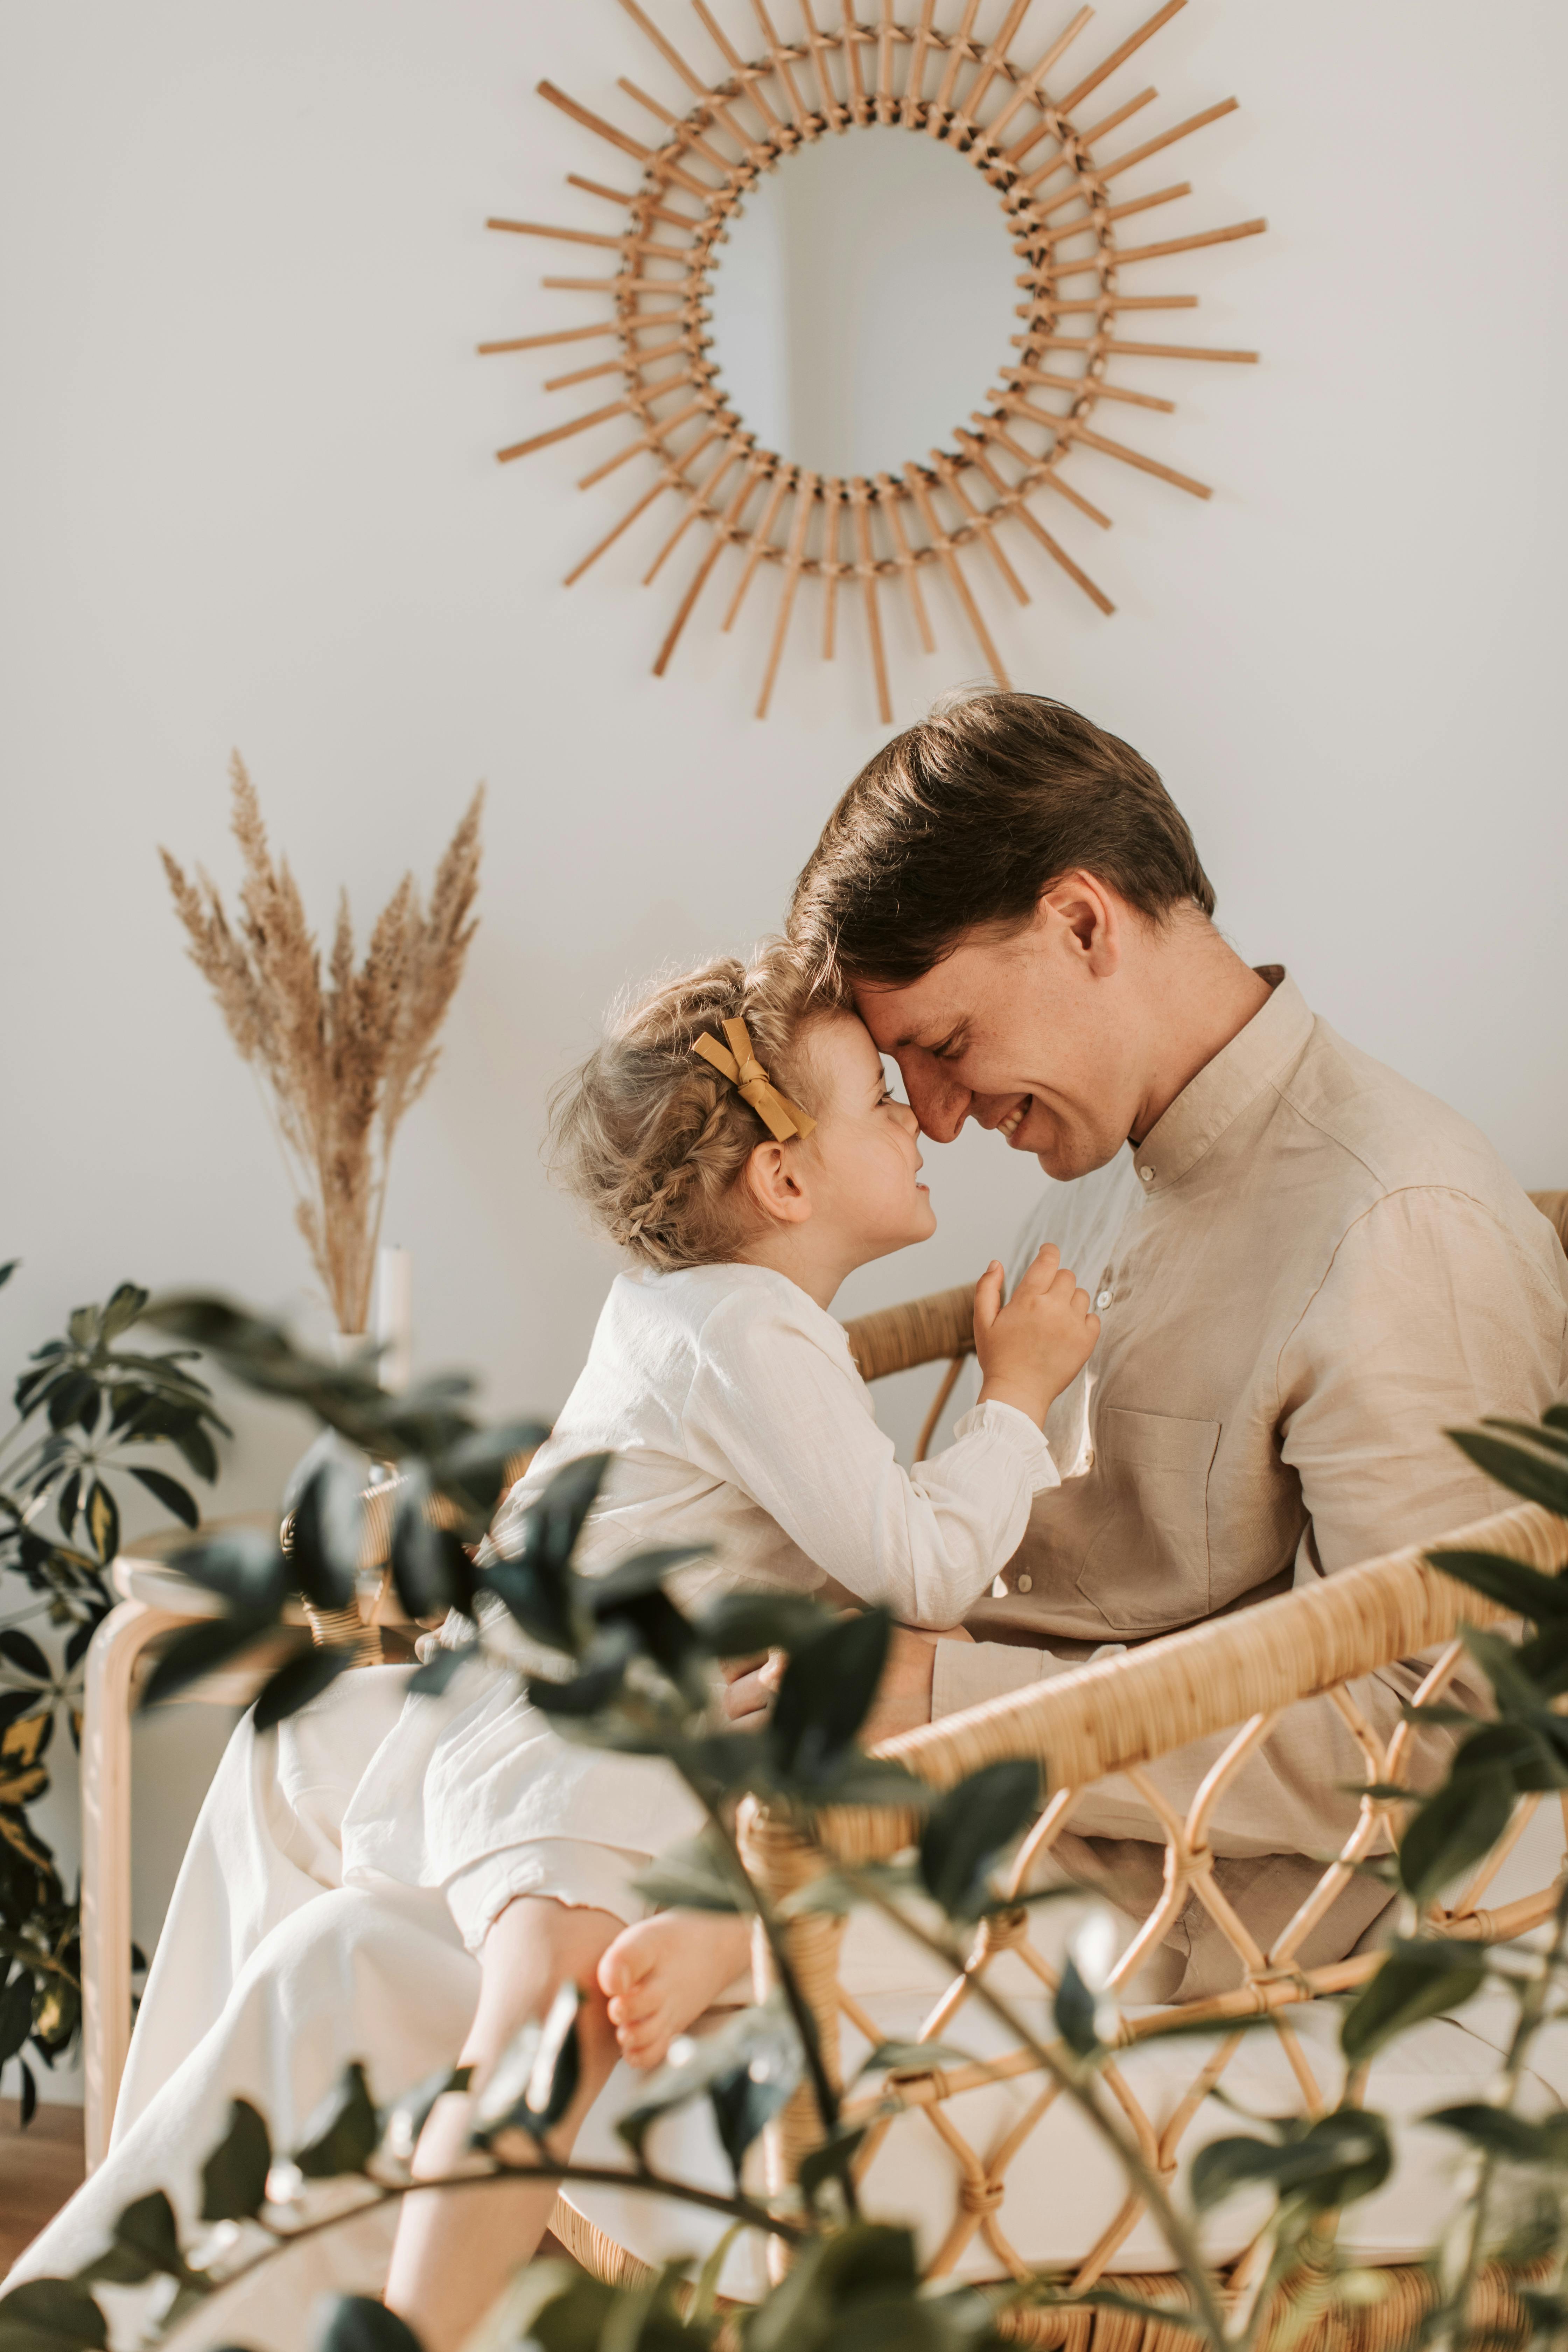 Young man with his small daughter | Source: Pexels